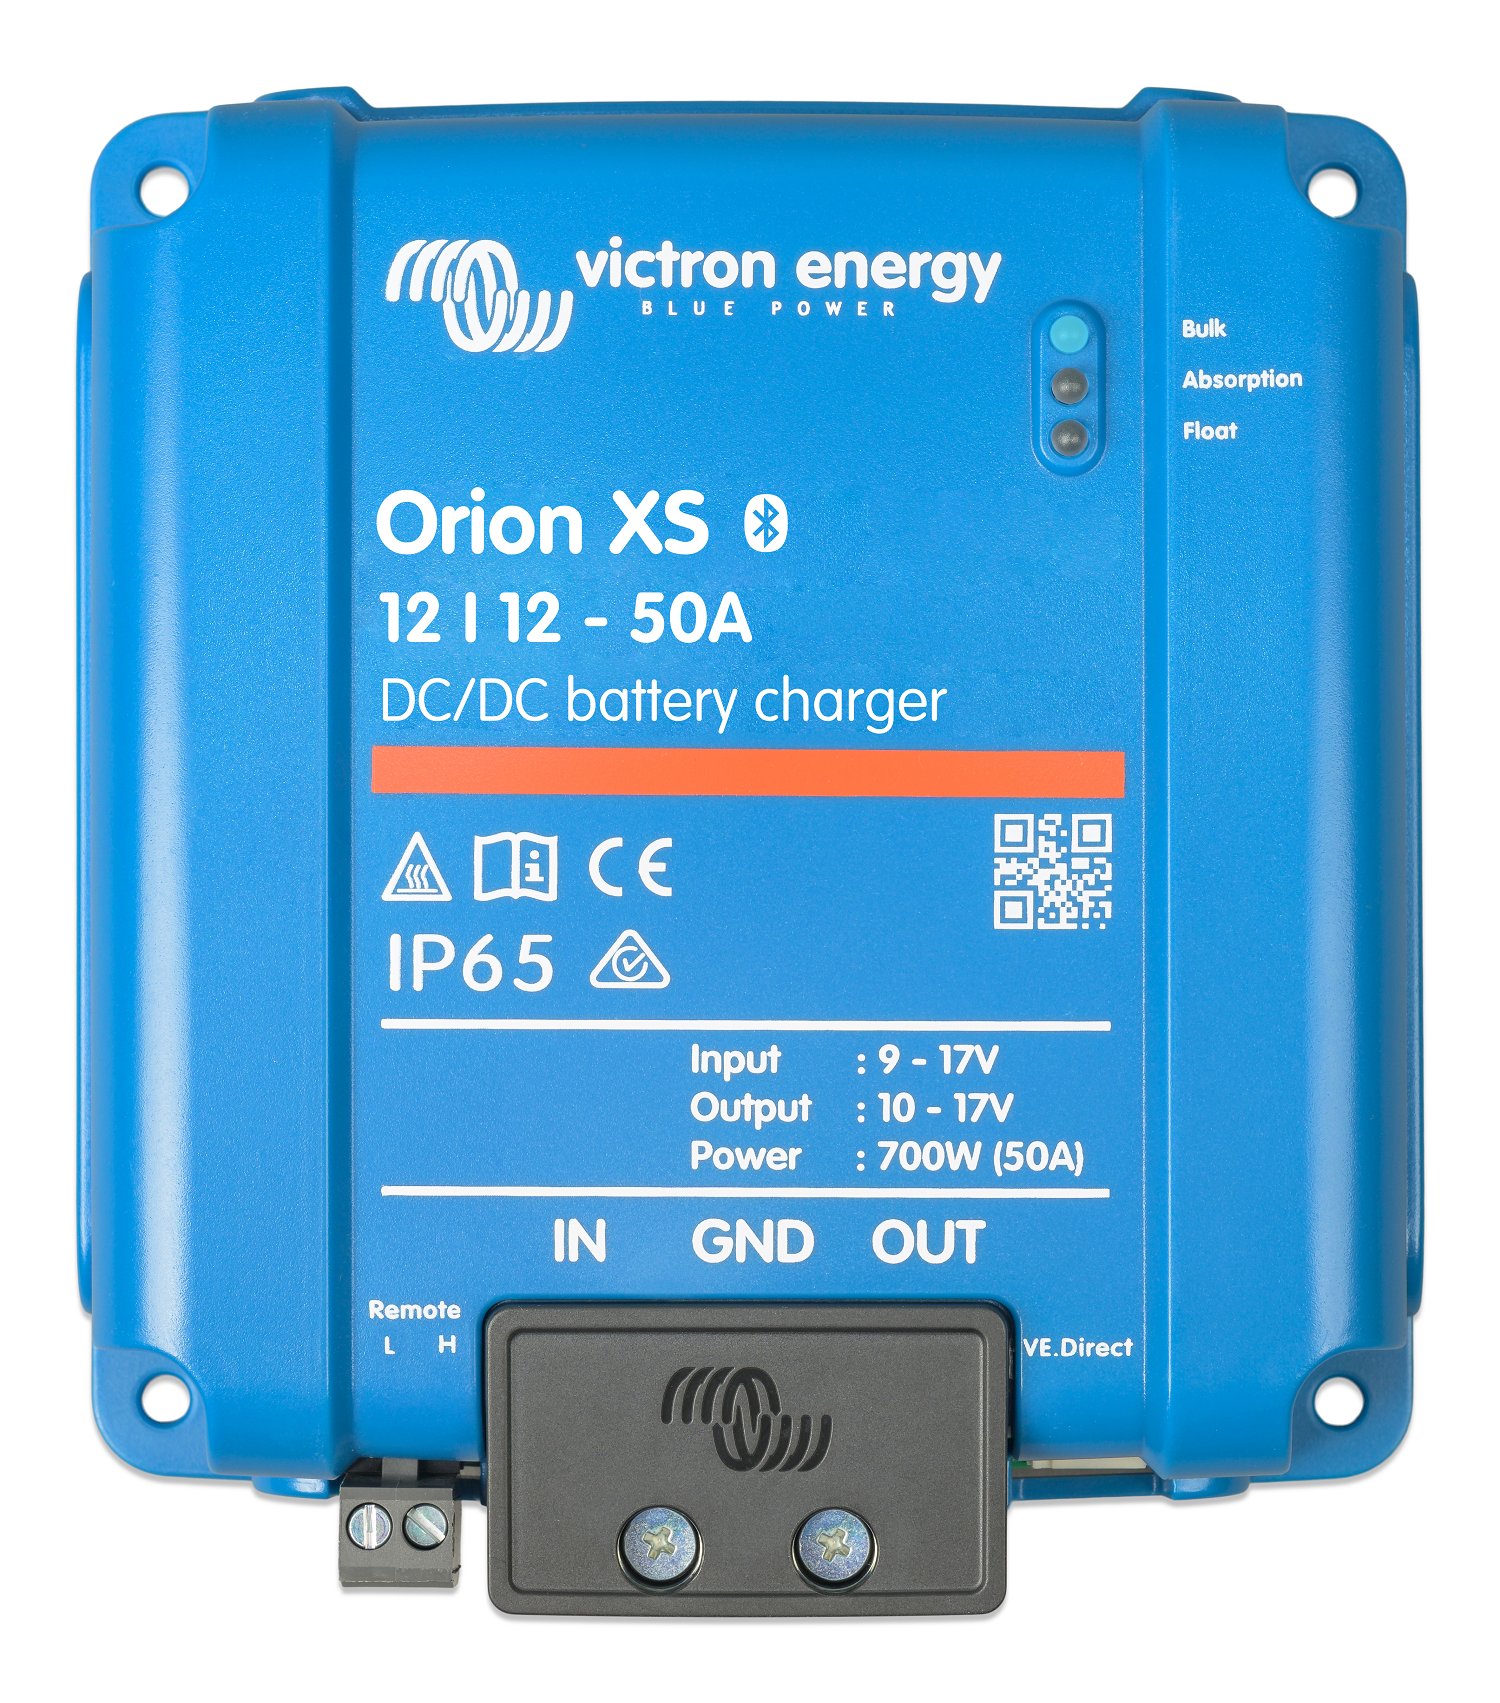 Can the Orion XS Smart Buckboost 50A non-isolated DC-DC charger connect to my Cerbo GX?